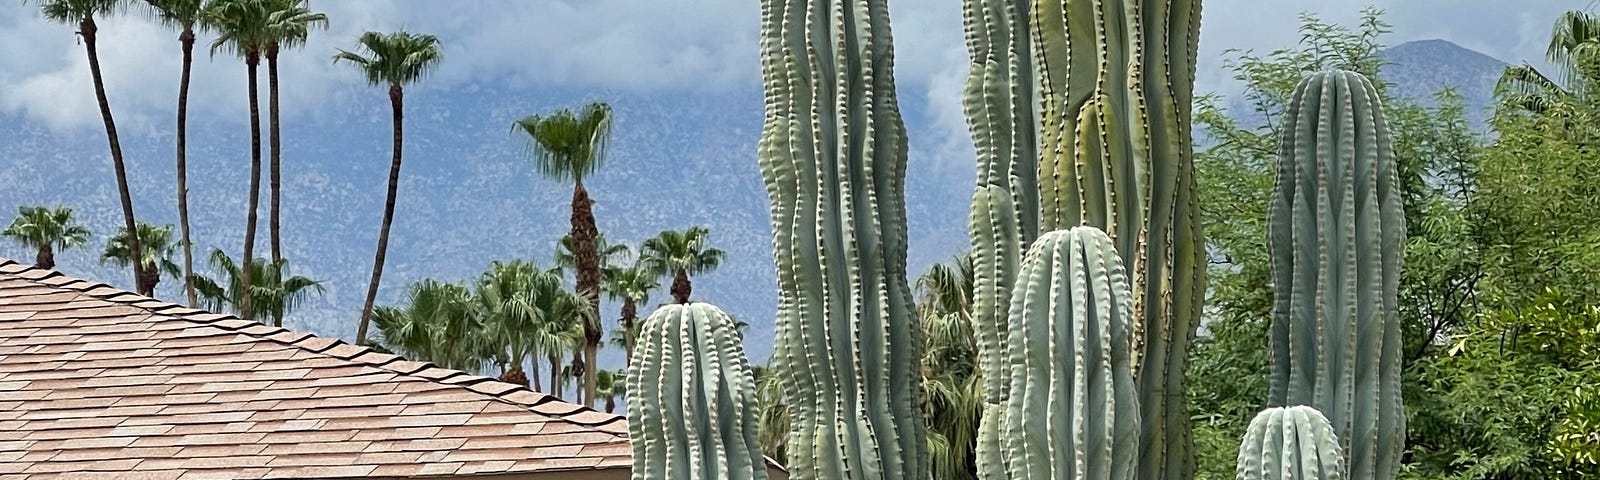 Photo of a Giant Cactus ( or Saguaro) by Mark Tulin